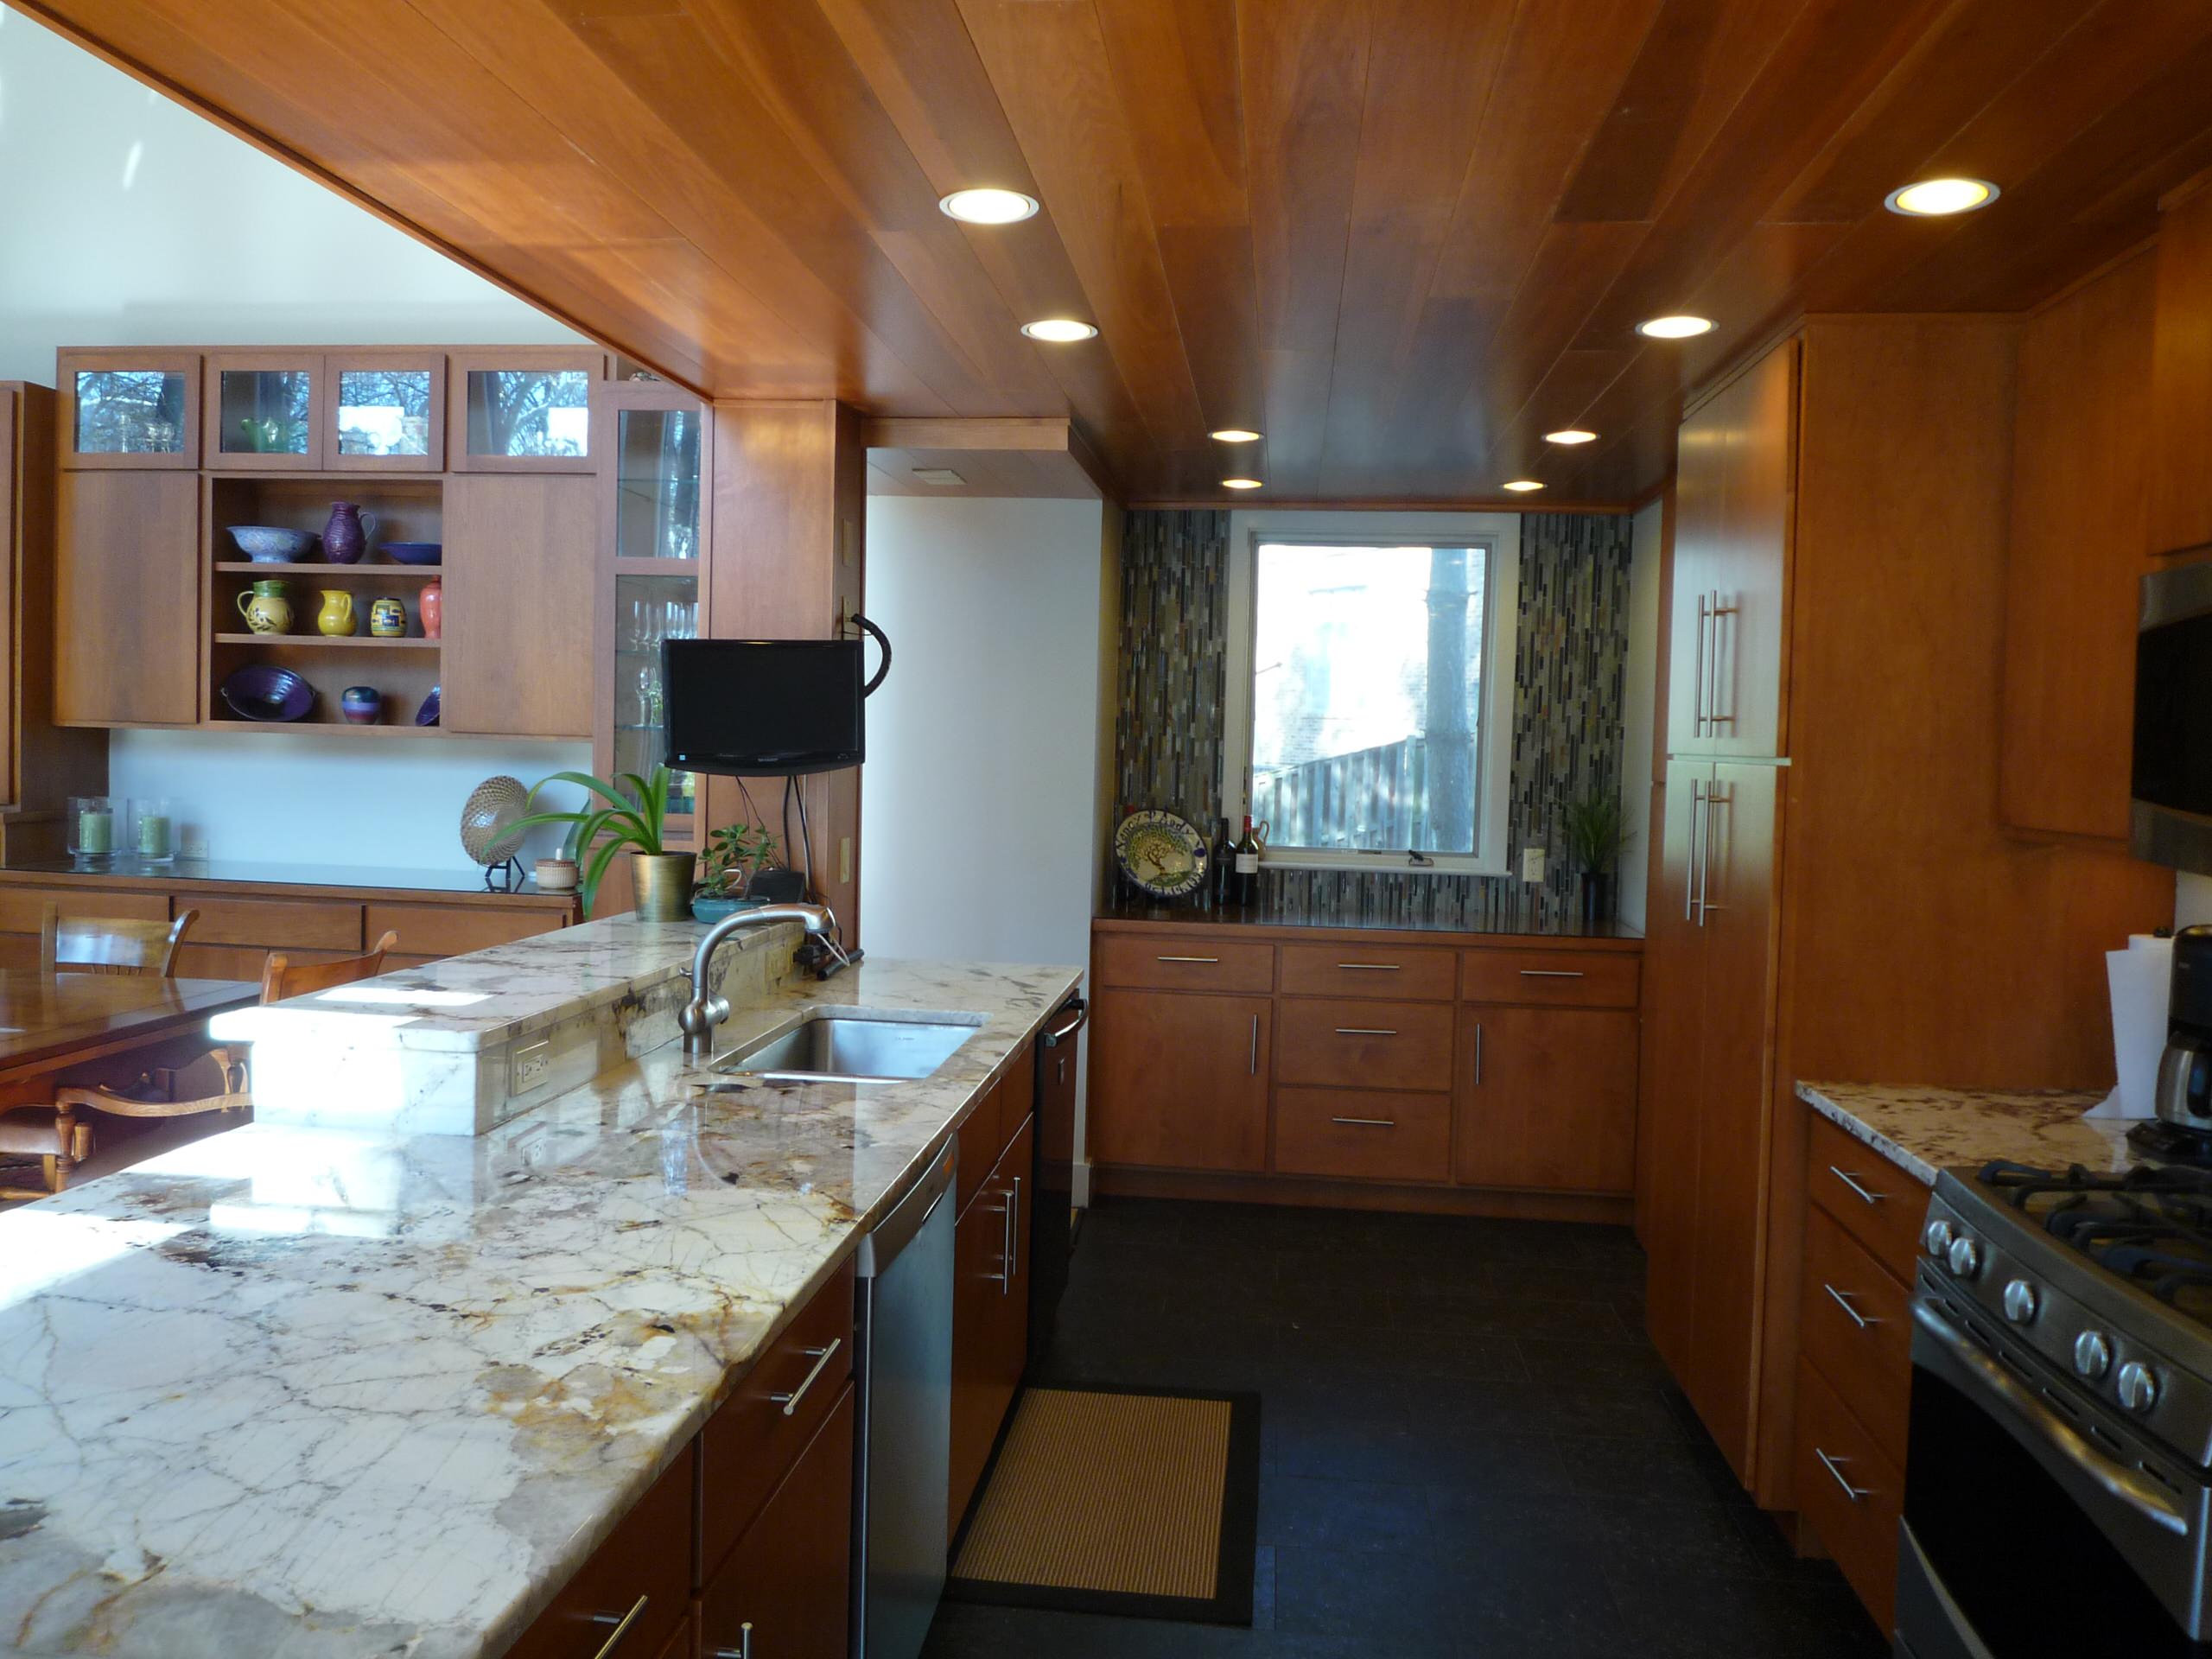 Contemporay, cherry, earthy, paneled ceiling kitchen